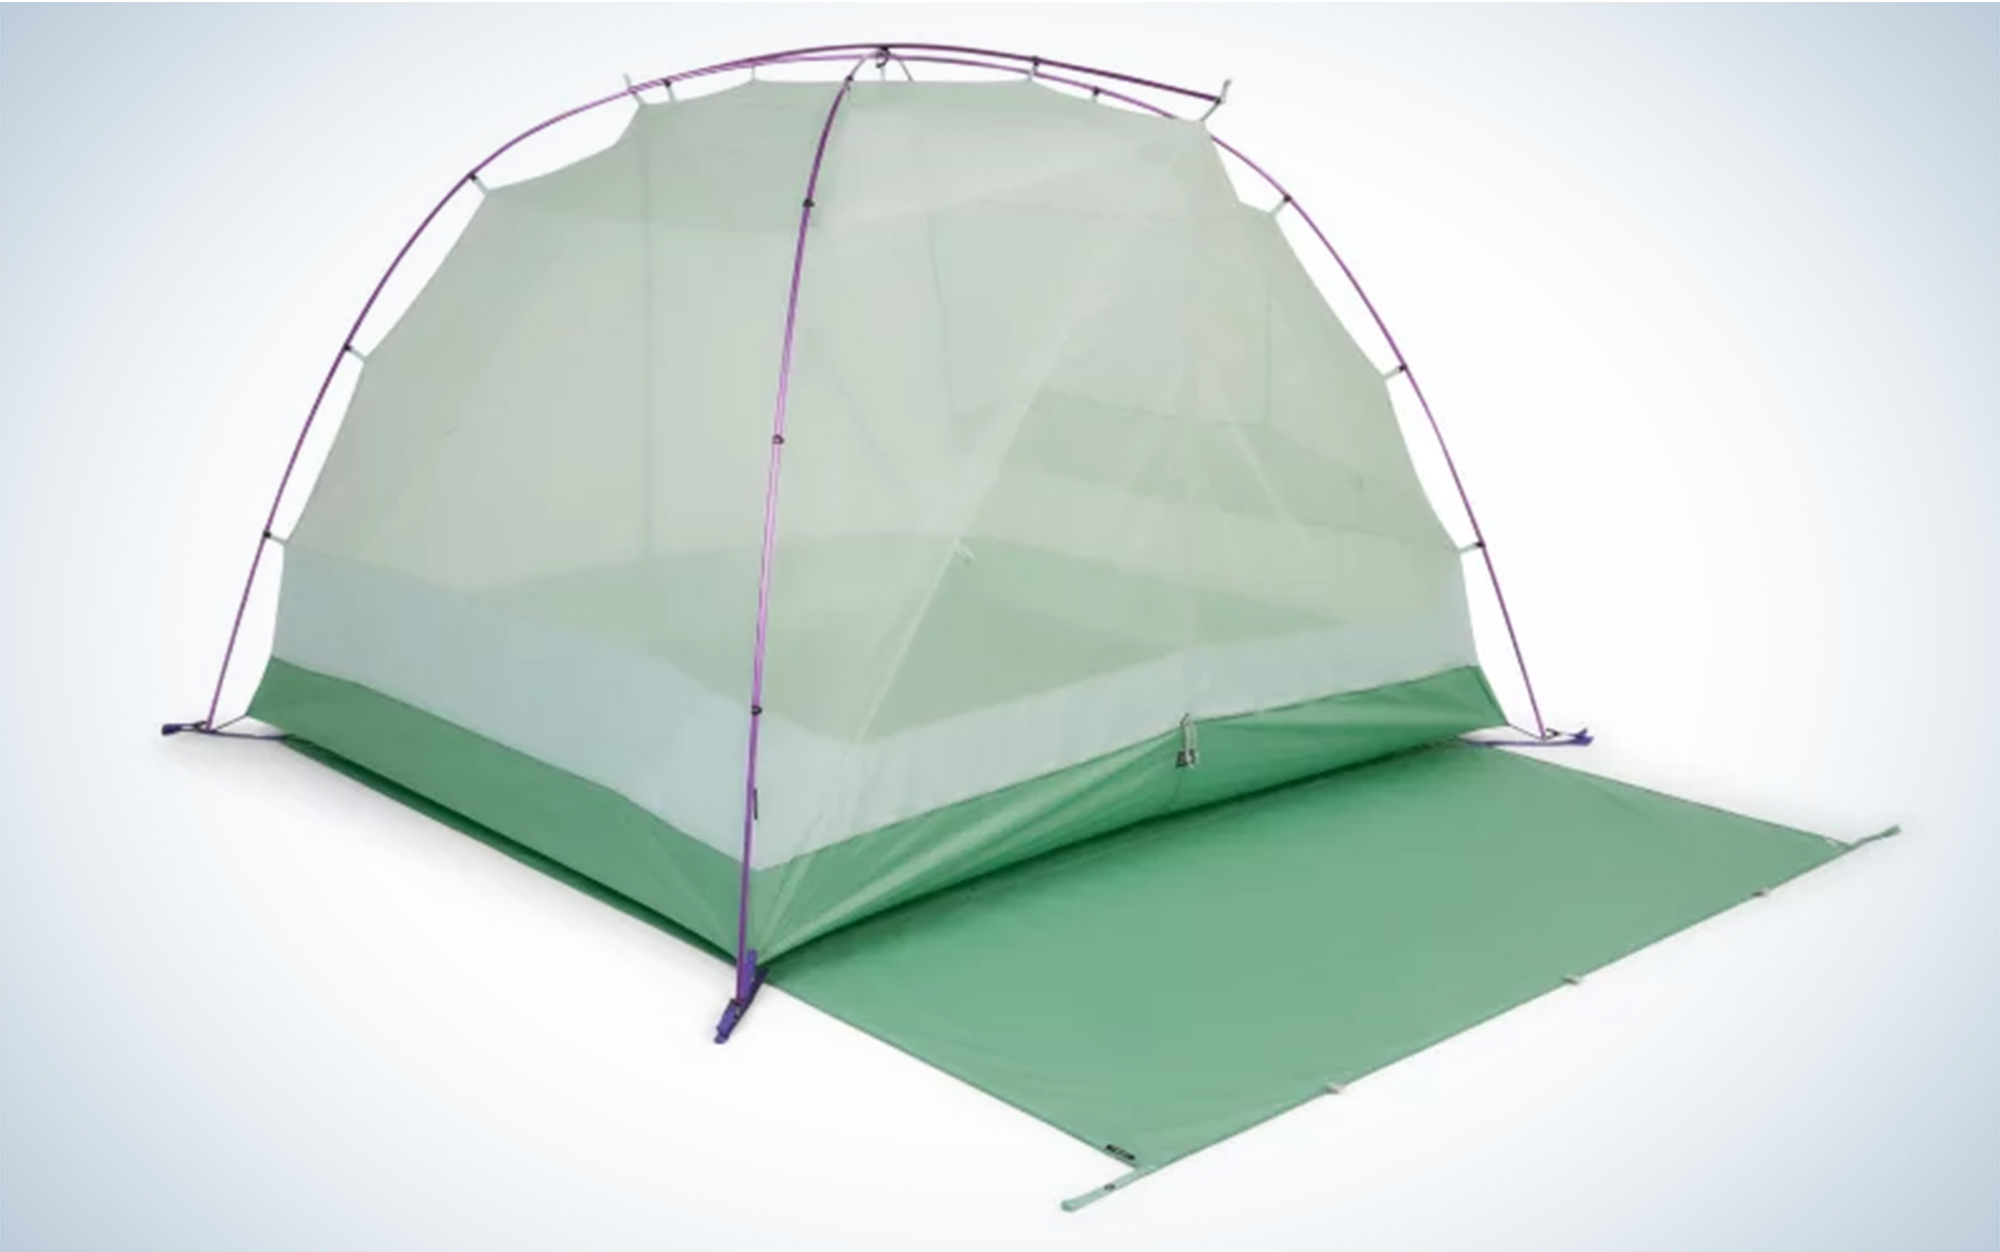 The Mountain Hardwear Bridger 4 is one of the best camping tents.